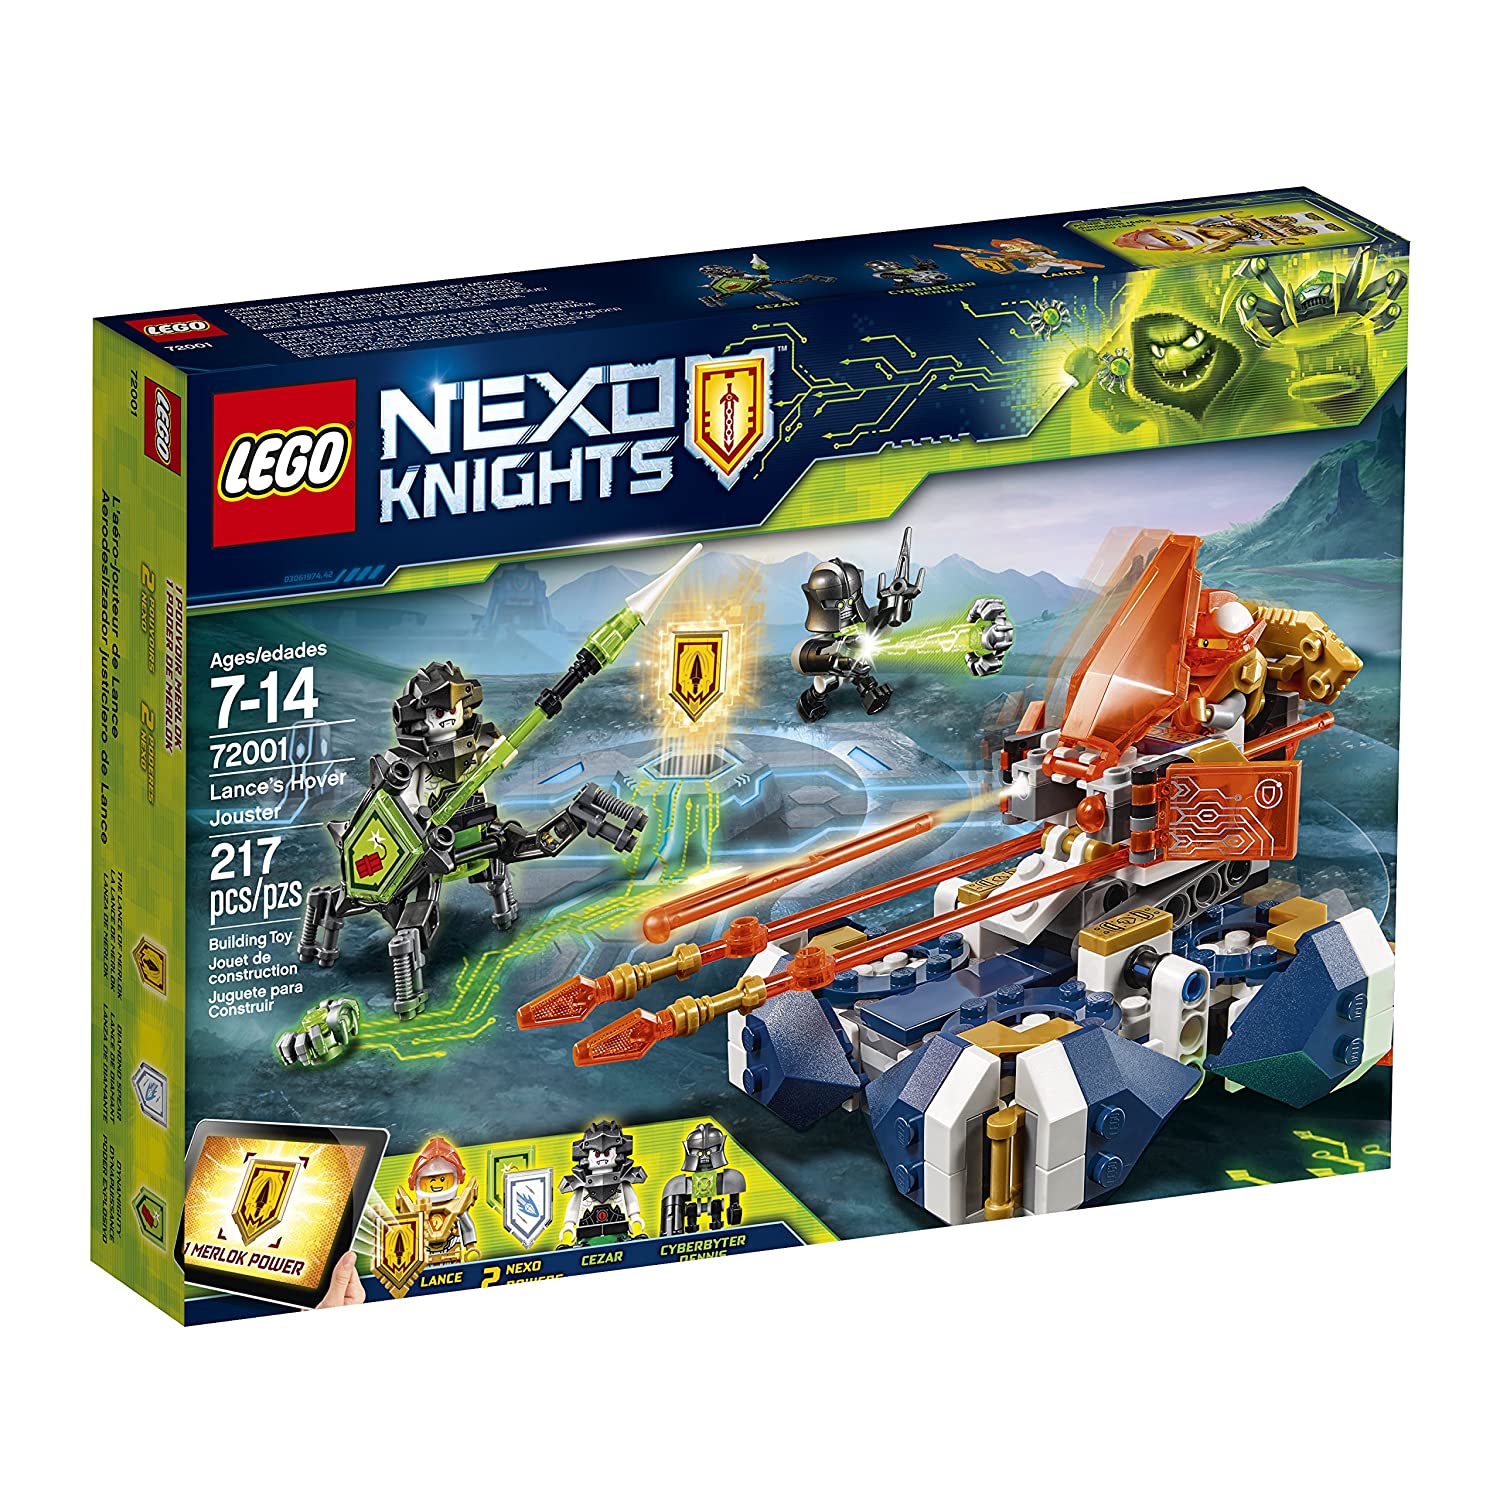 9 Best LEGO Nexo Knights Set 2022 - Buying Guide & Reviews 7